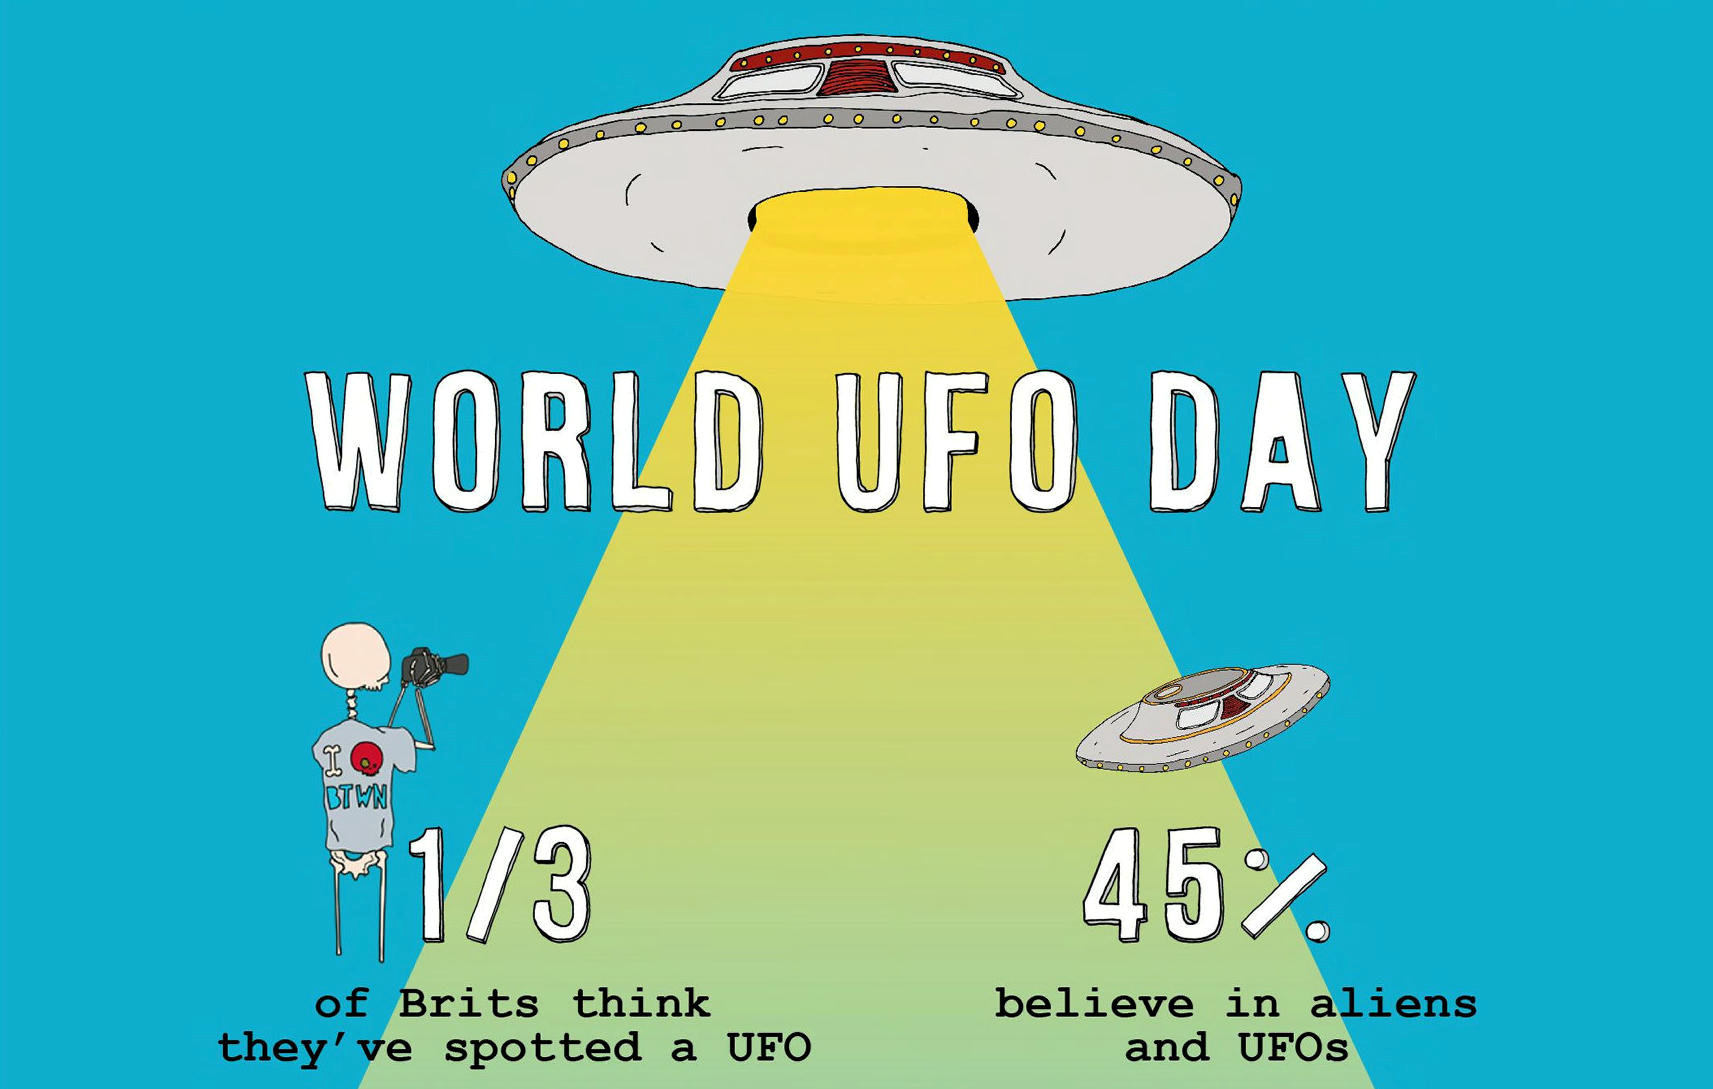 Extra Arrest-rial: A Third Of The British Population Claim They’ve Spotted A UFO